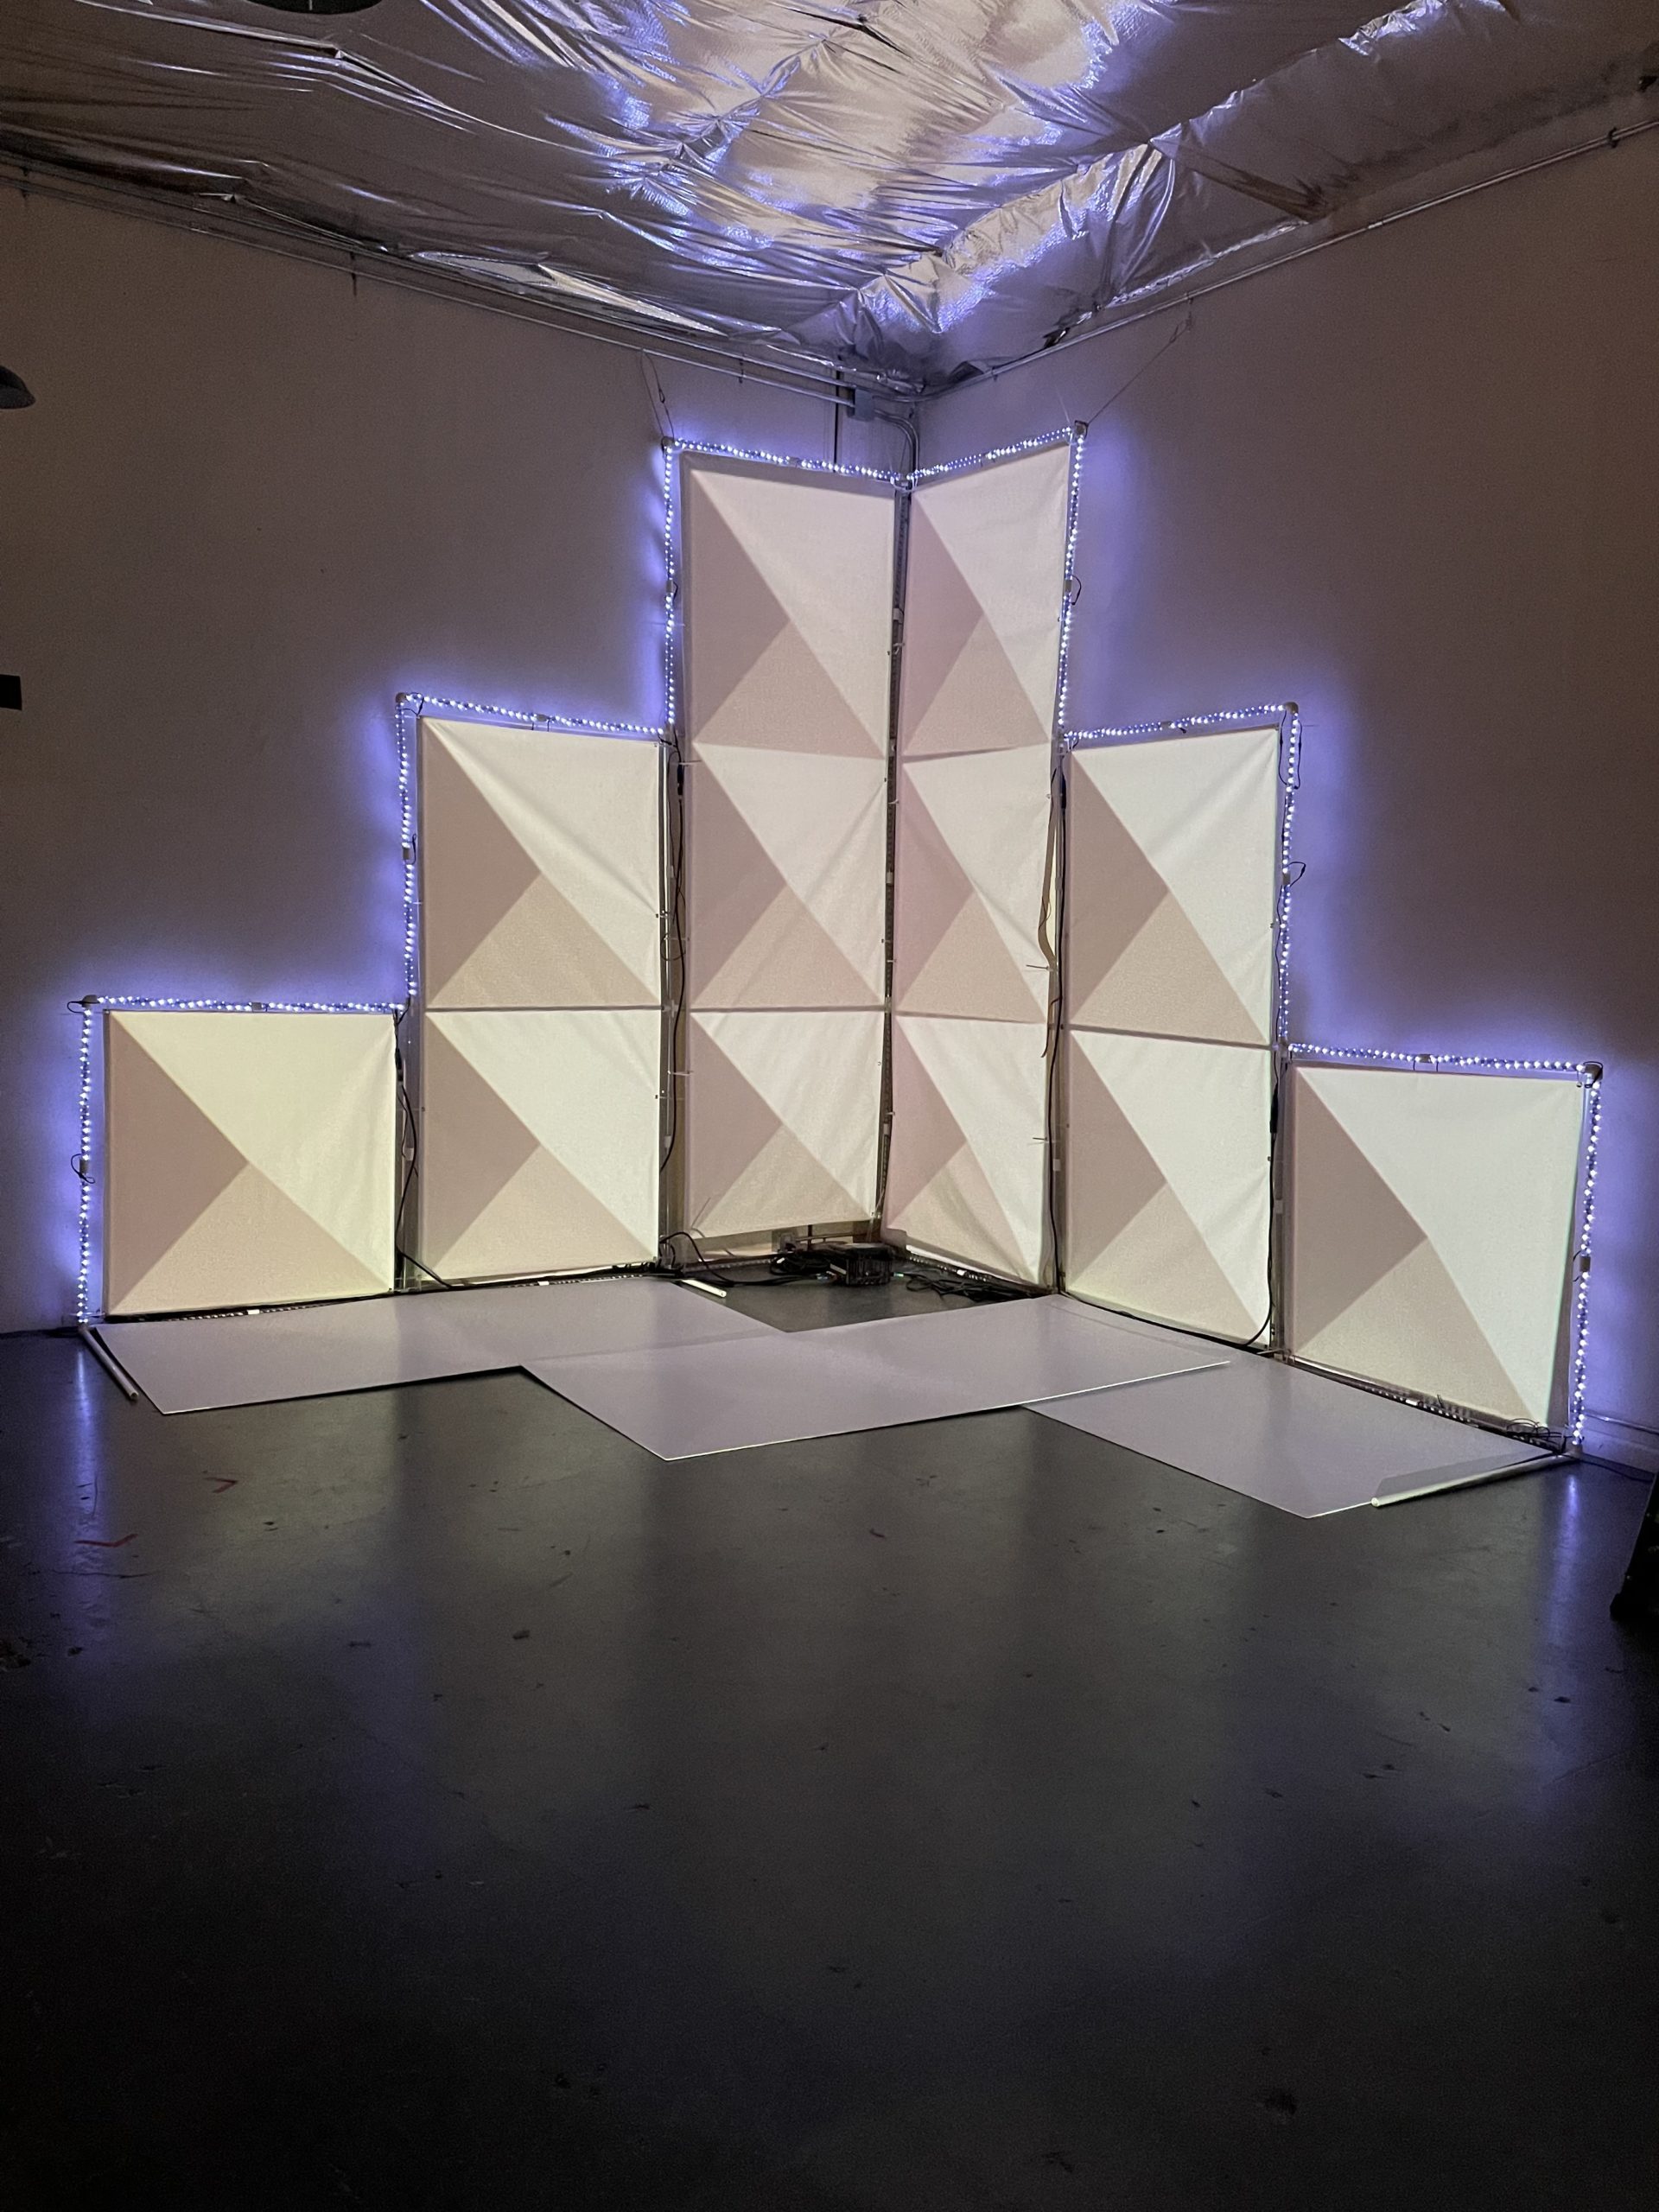 a snow white geometric pyramid structure made of squares and a 3D illusion of triangles projected onto one corner of a warehouse wall.